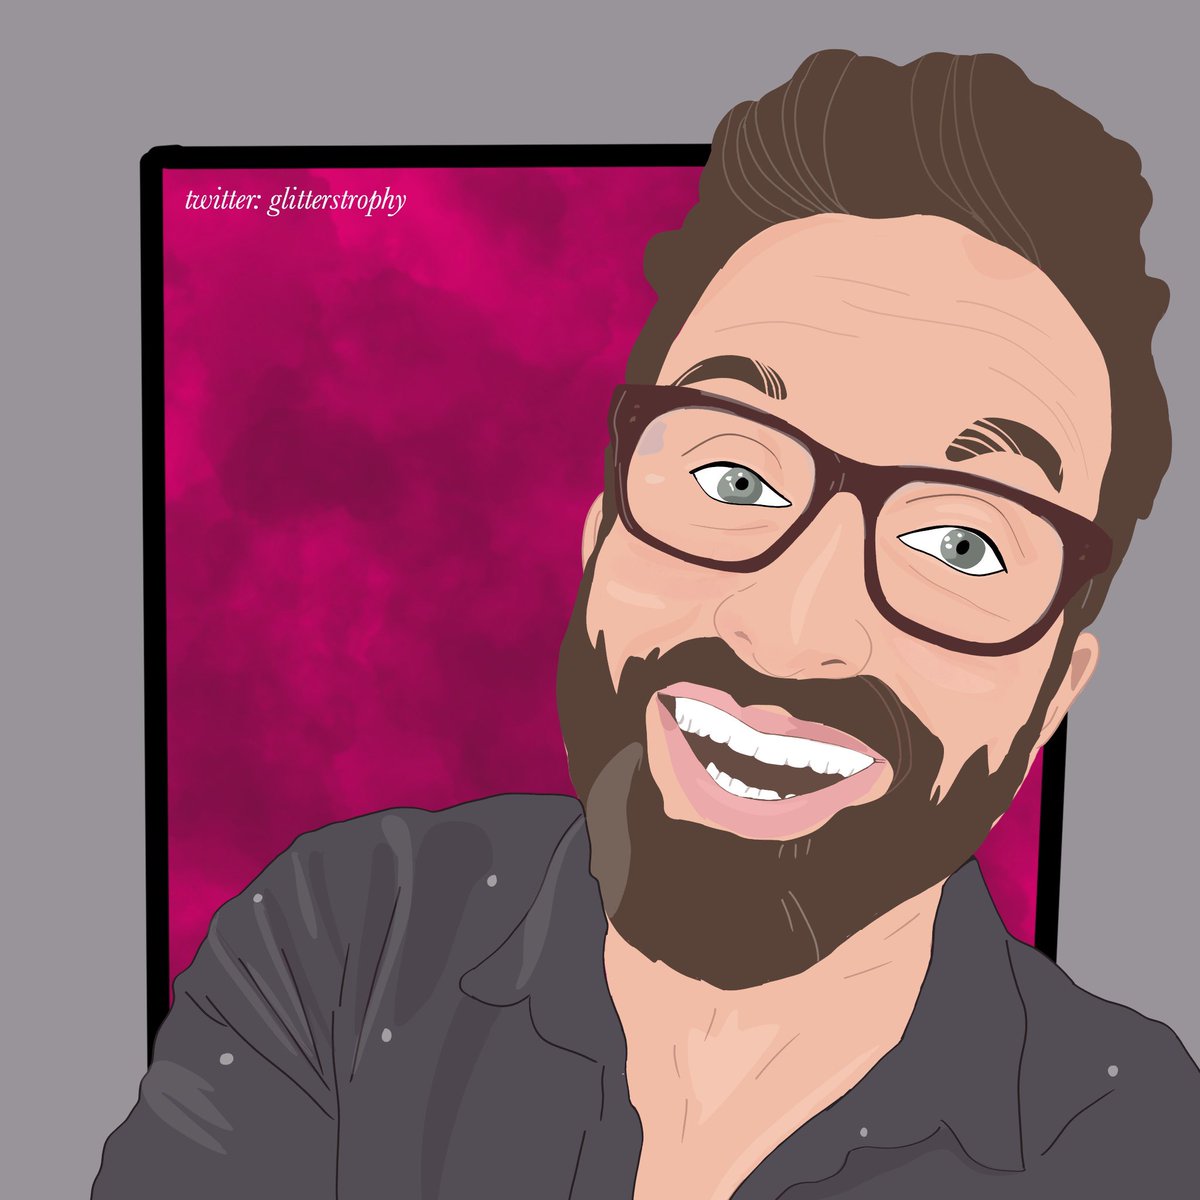 Hello  @RobBenedict I hope you know how loved you areHere is a drawing of you I made today